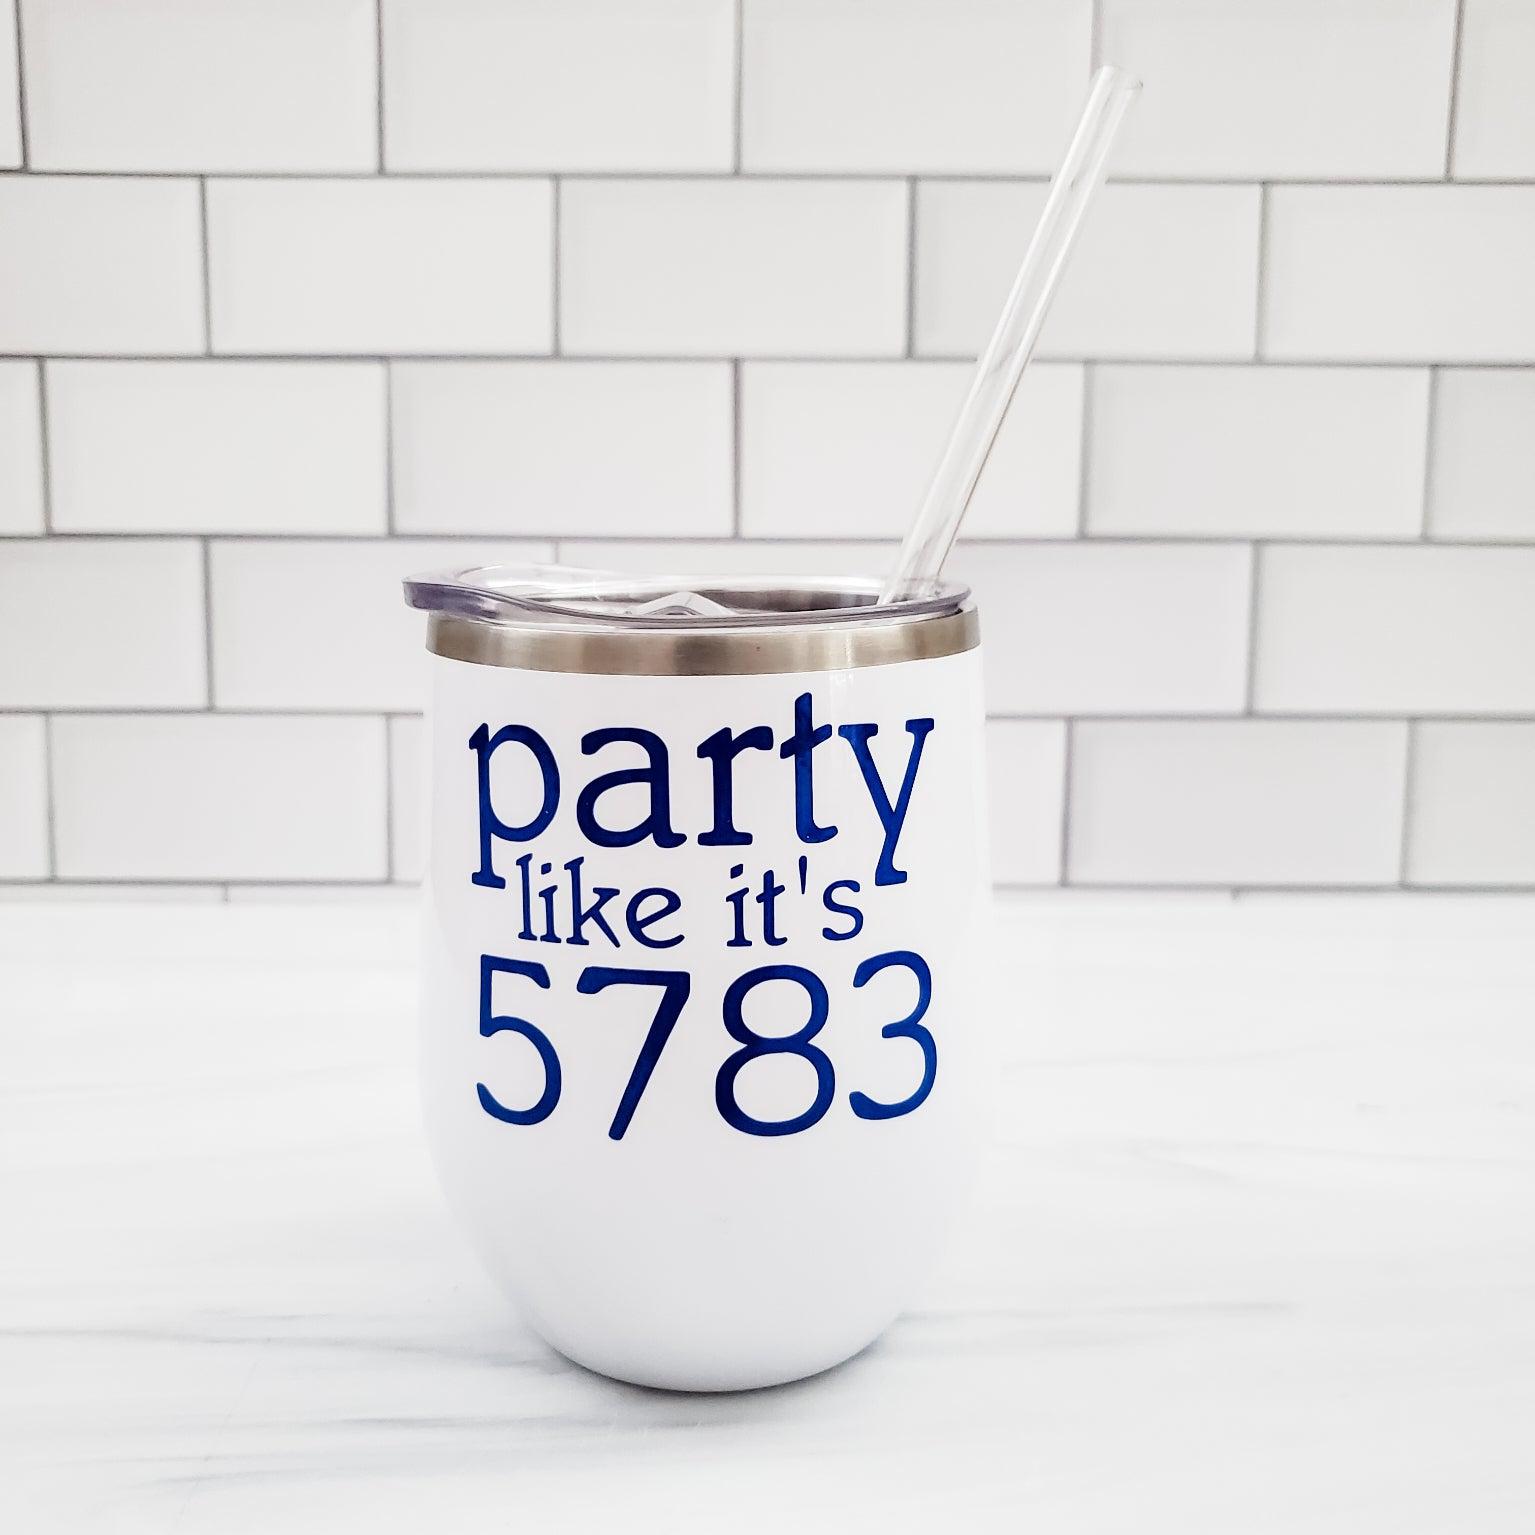 PARTY LIKE IT'S 5783 Wine Tumbler Salt and Sparkle